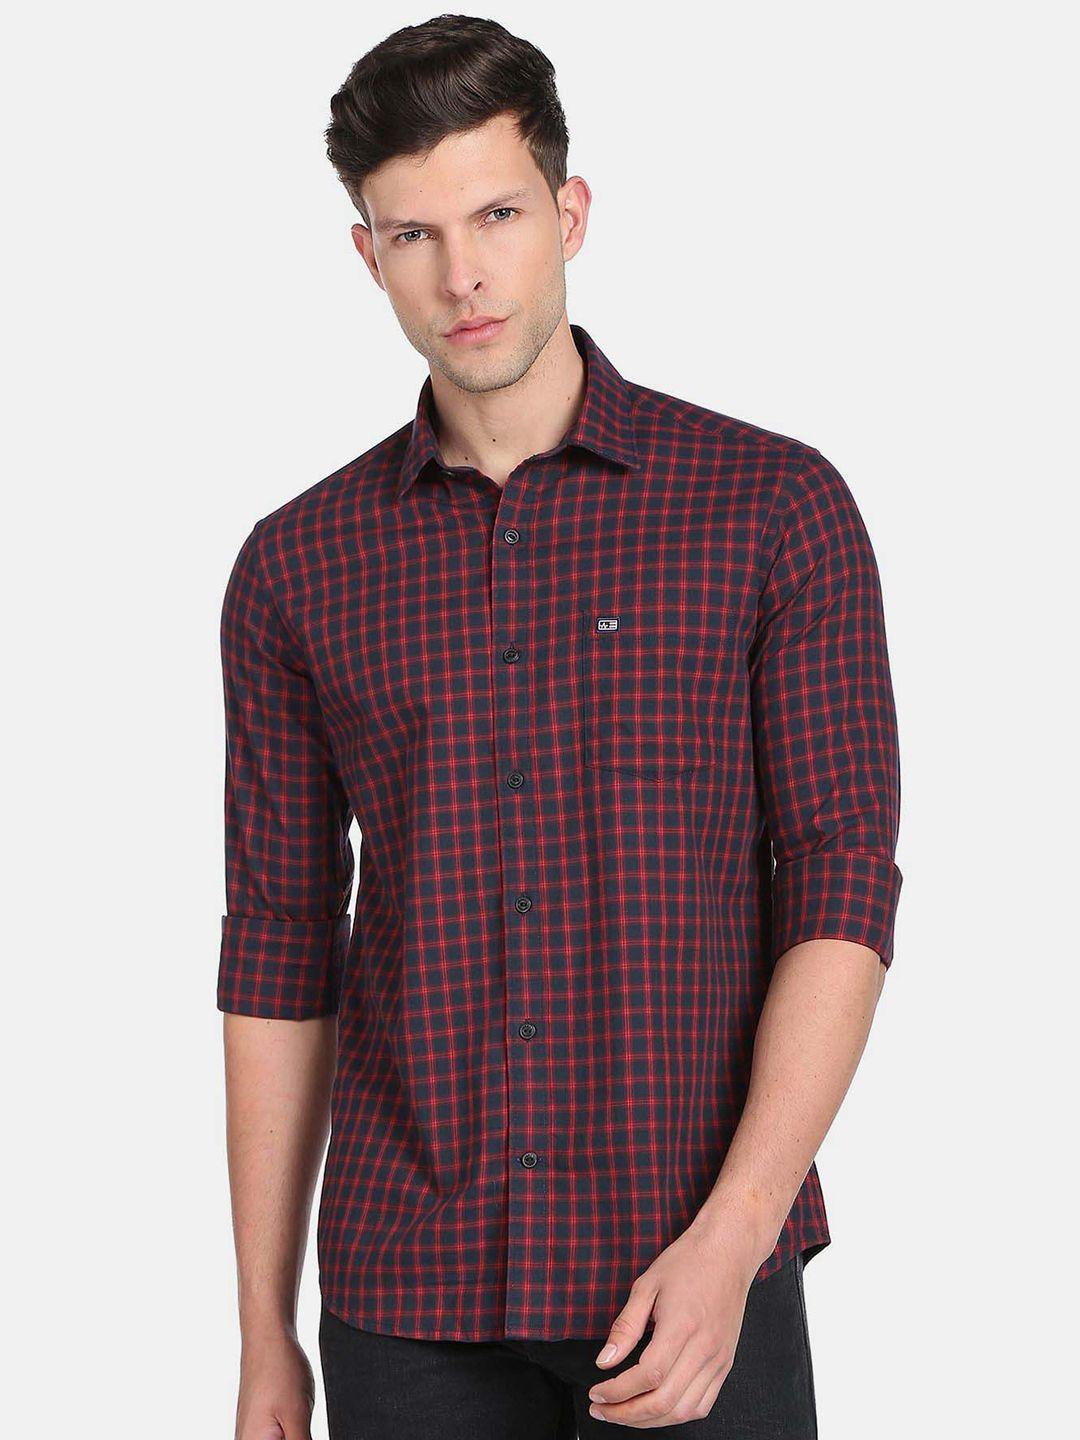 arrow-sport-men-slim-fit-checked-casual-pure-twill-weave-cotton-shirt